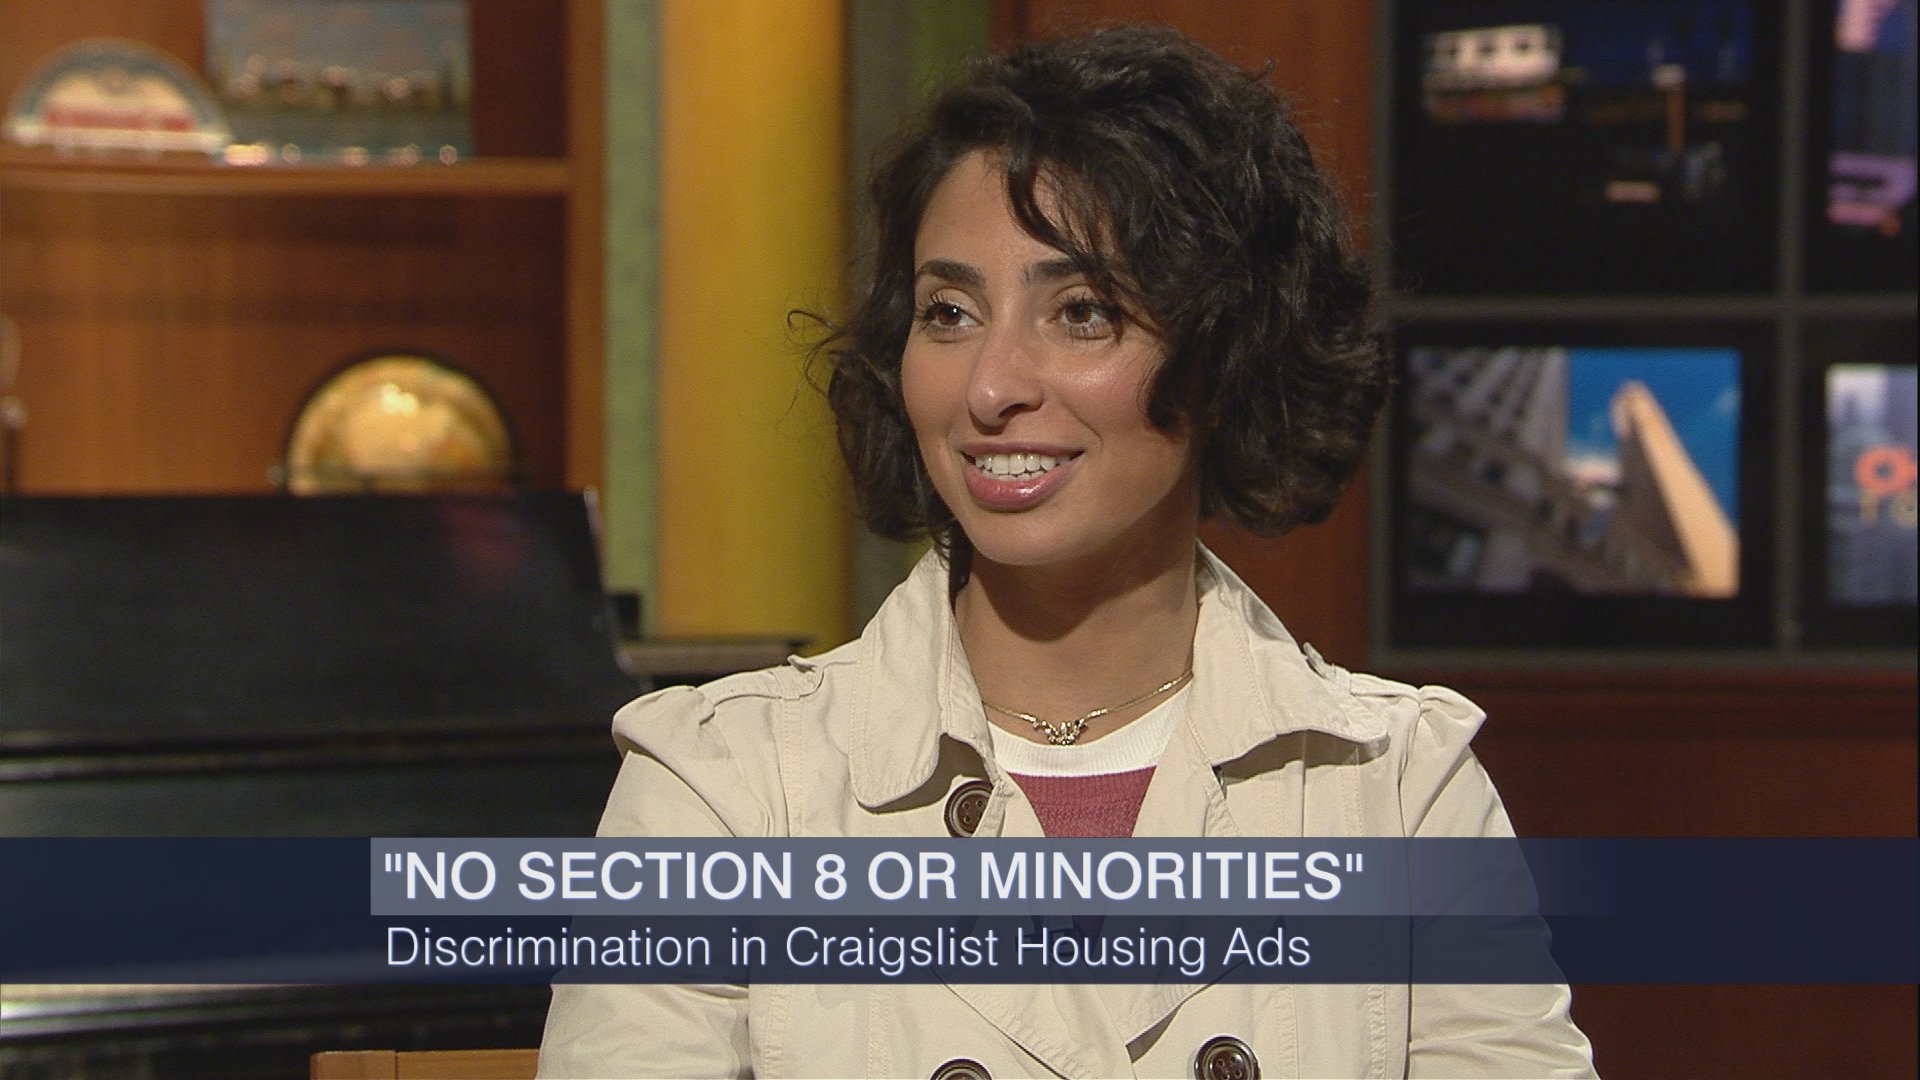 Craigslist Ads Citing 'No Section 8' Found Among Chicago ...